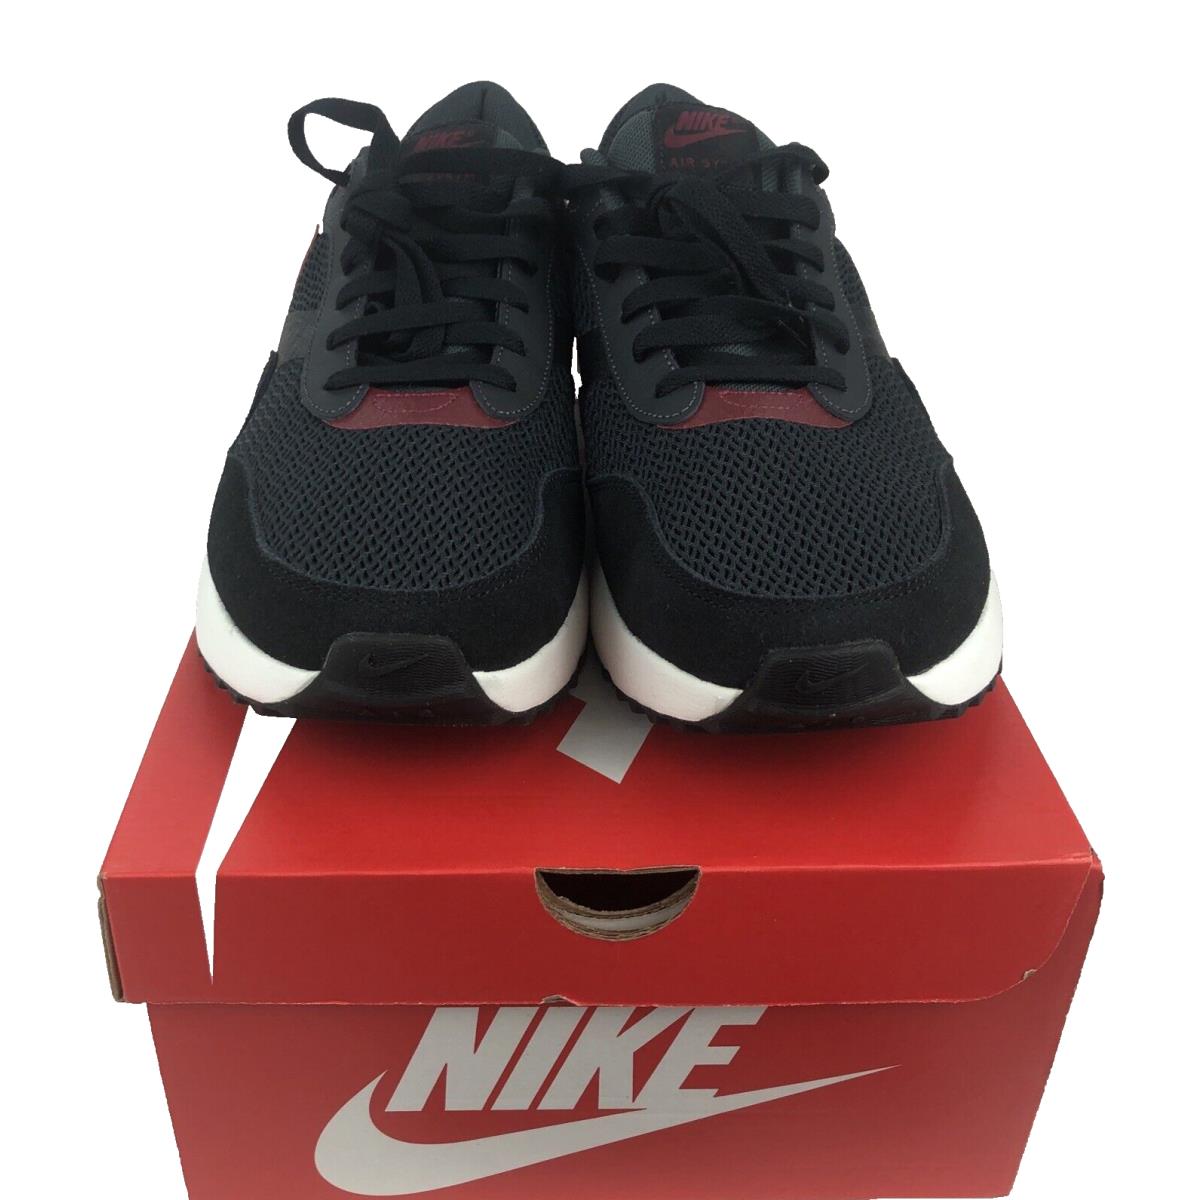 Nike shoes Air Max System - Black Red White 1